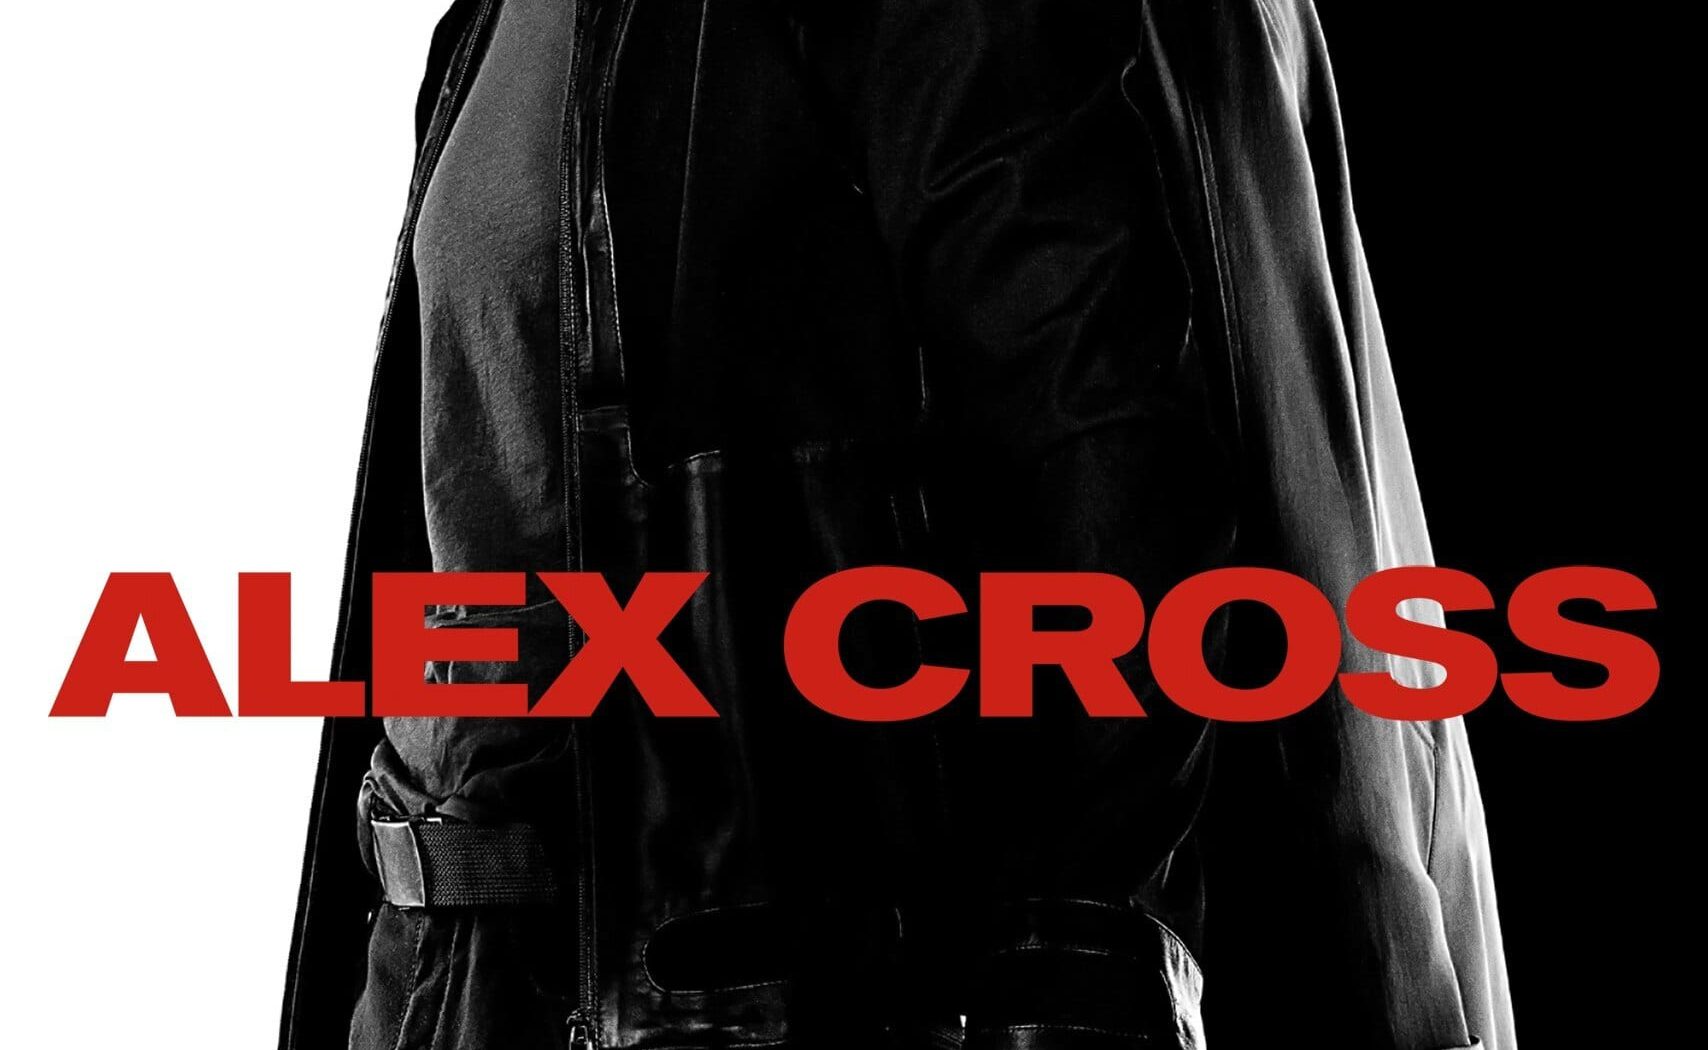 Poster for the movie "Alex Cross"